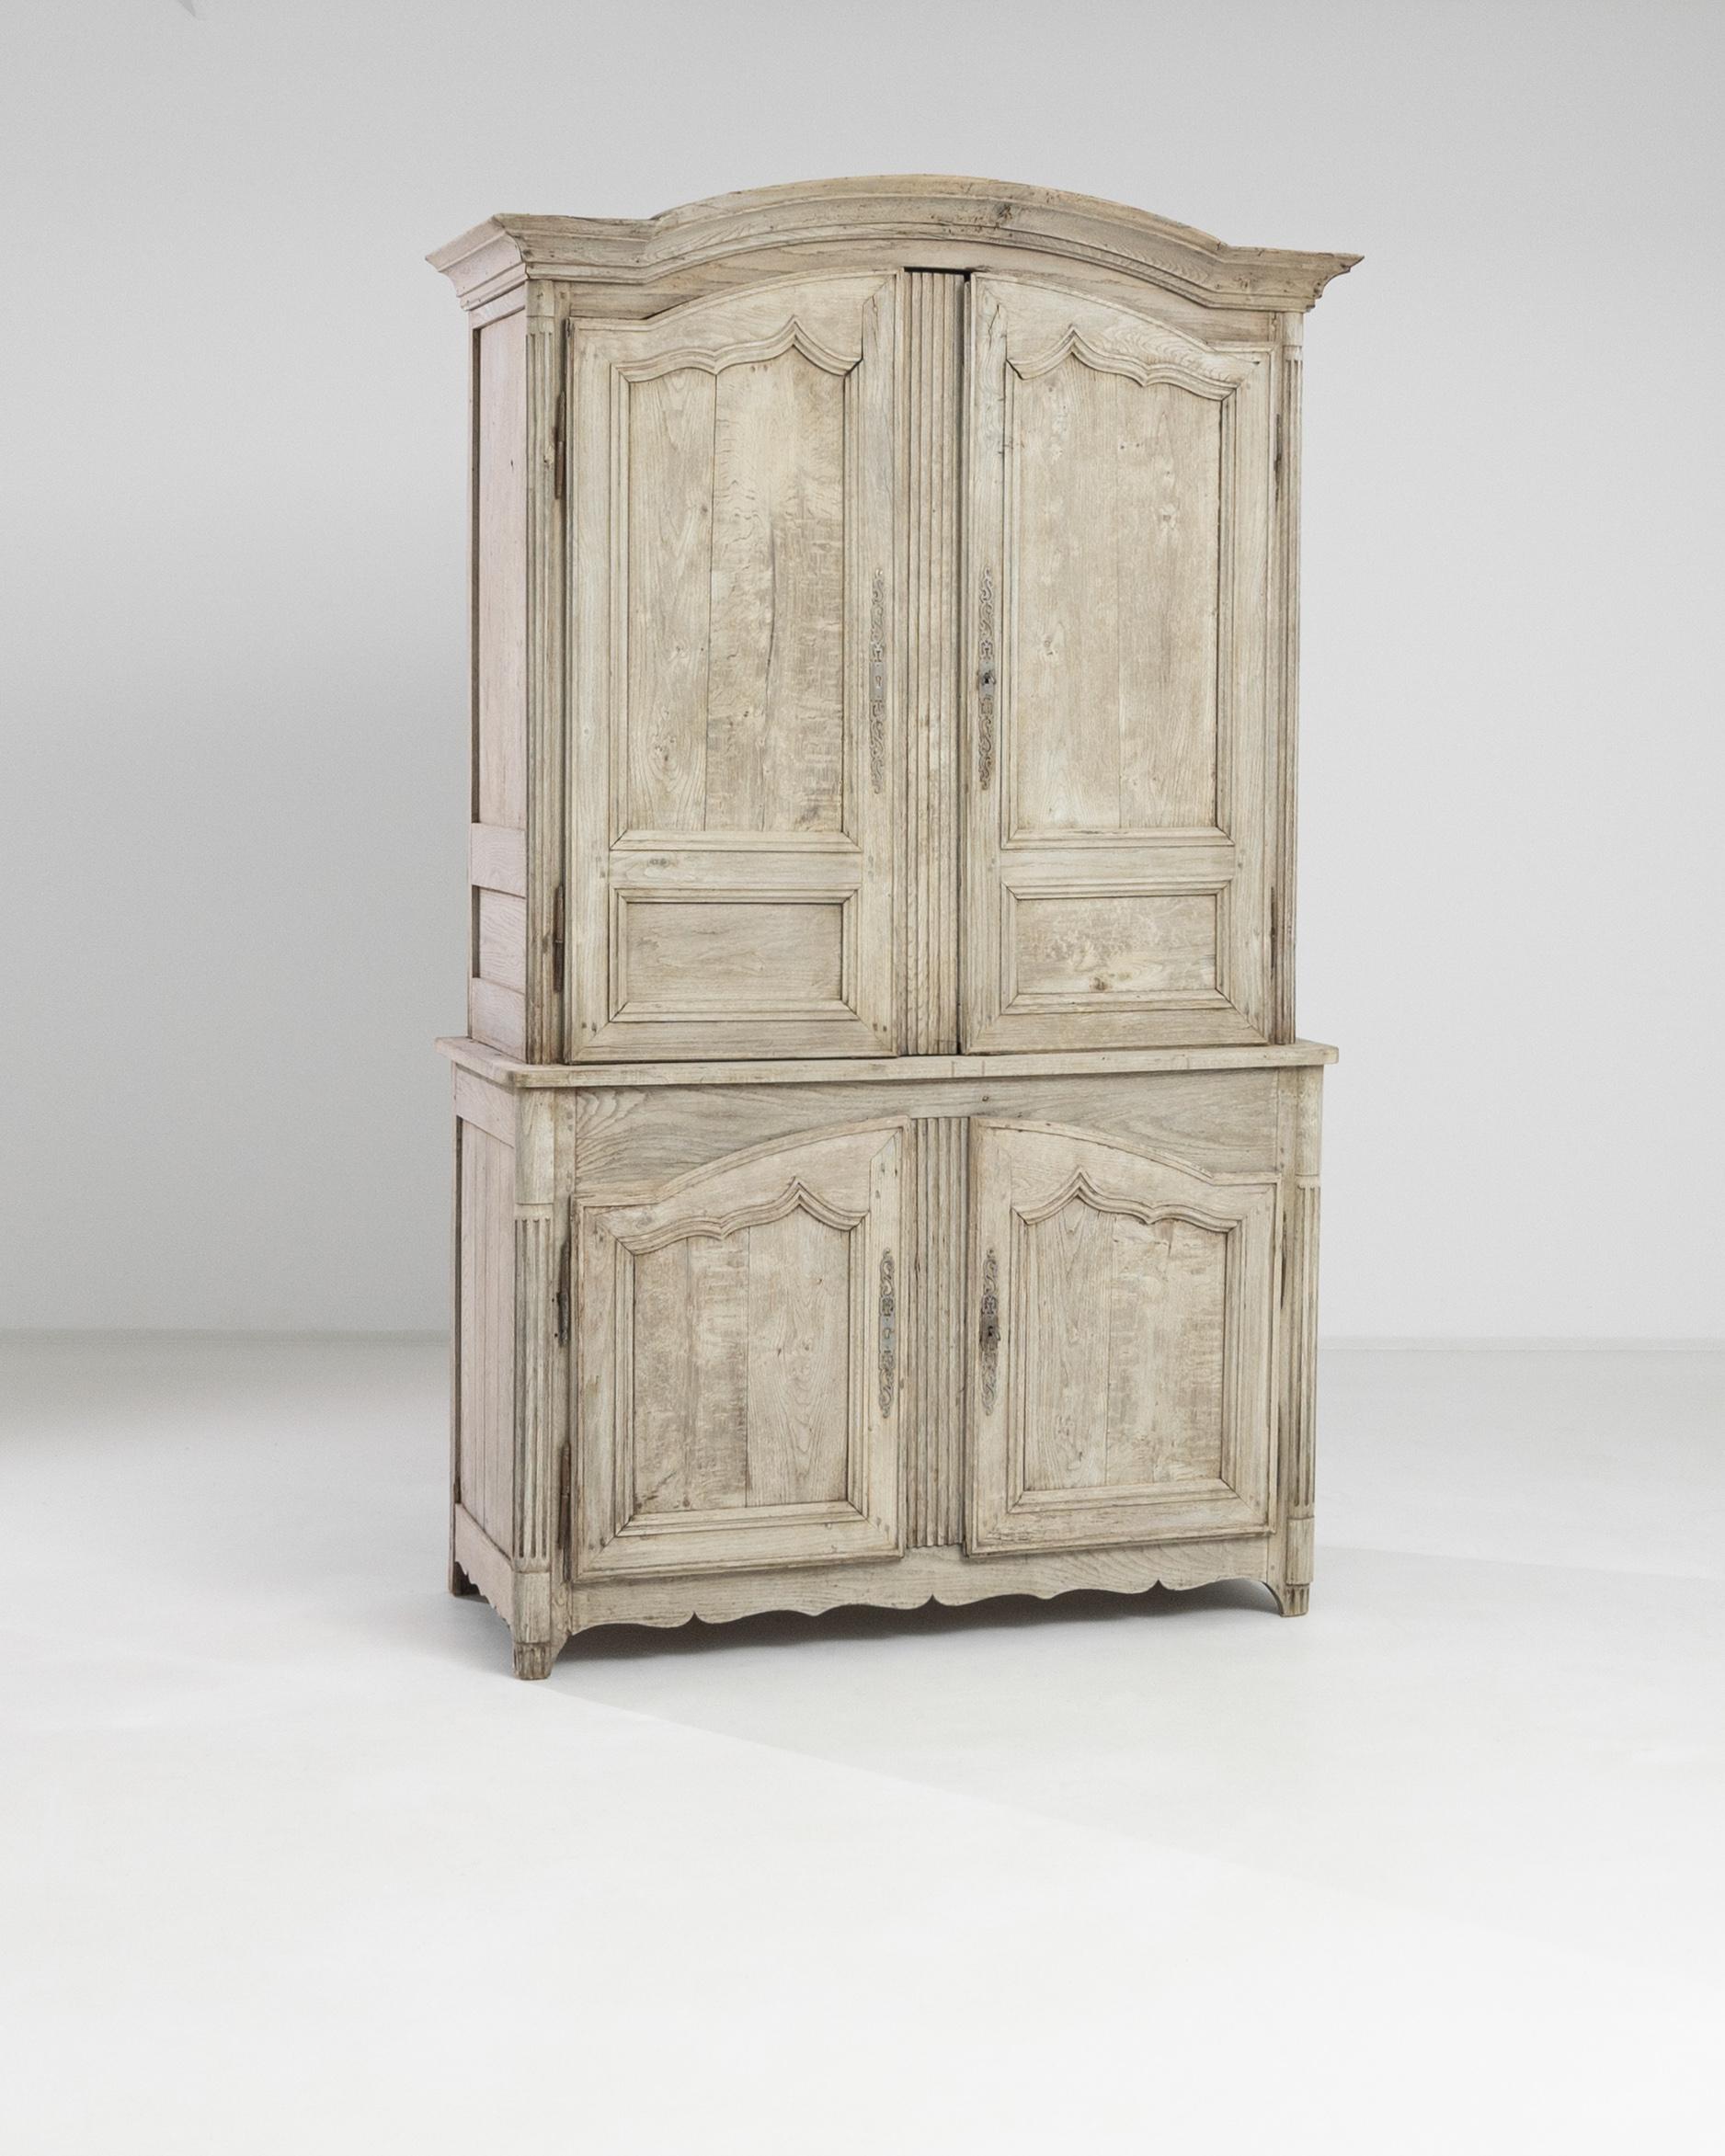 A 19th century wooden cabinet produced in France. Standing on fluted bracket feet, this large two-case cabinet displays a molded top, a scalloped apron and turned fluted edges. The exterior has been restored to a pale tone, highlighting the organic